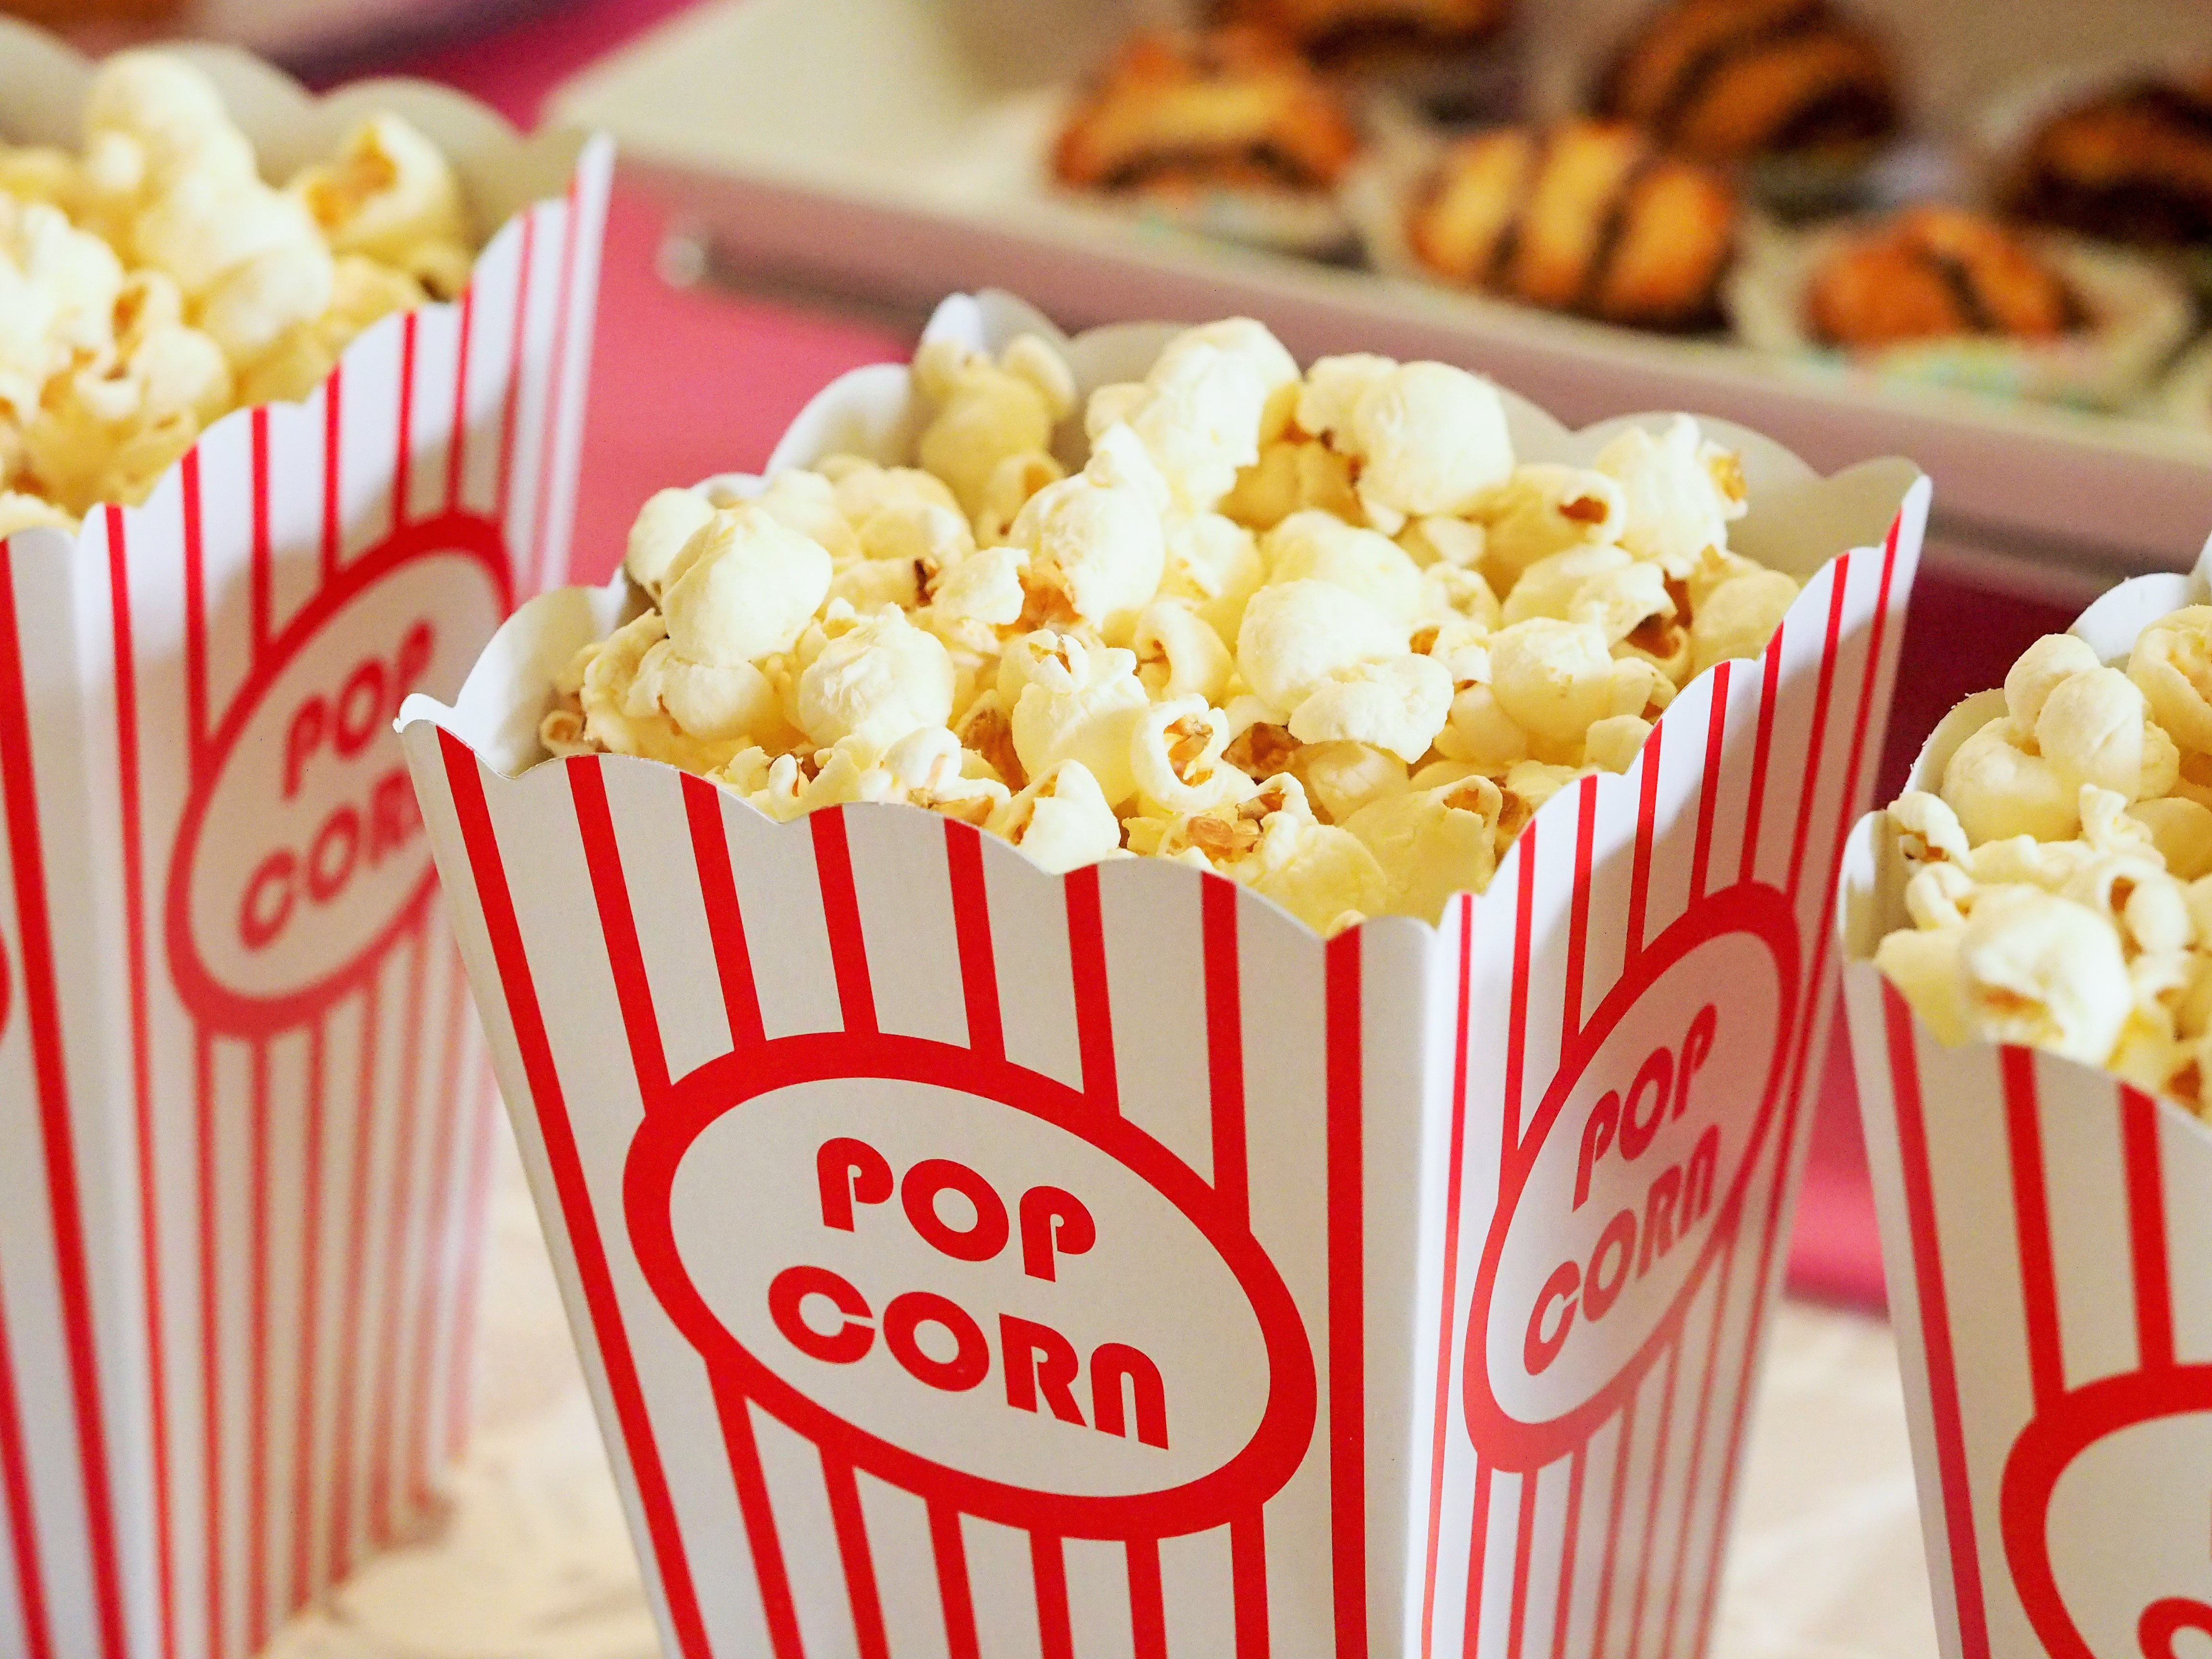 Popcorn in nostalgic red and white striped containers.